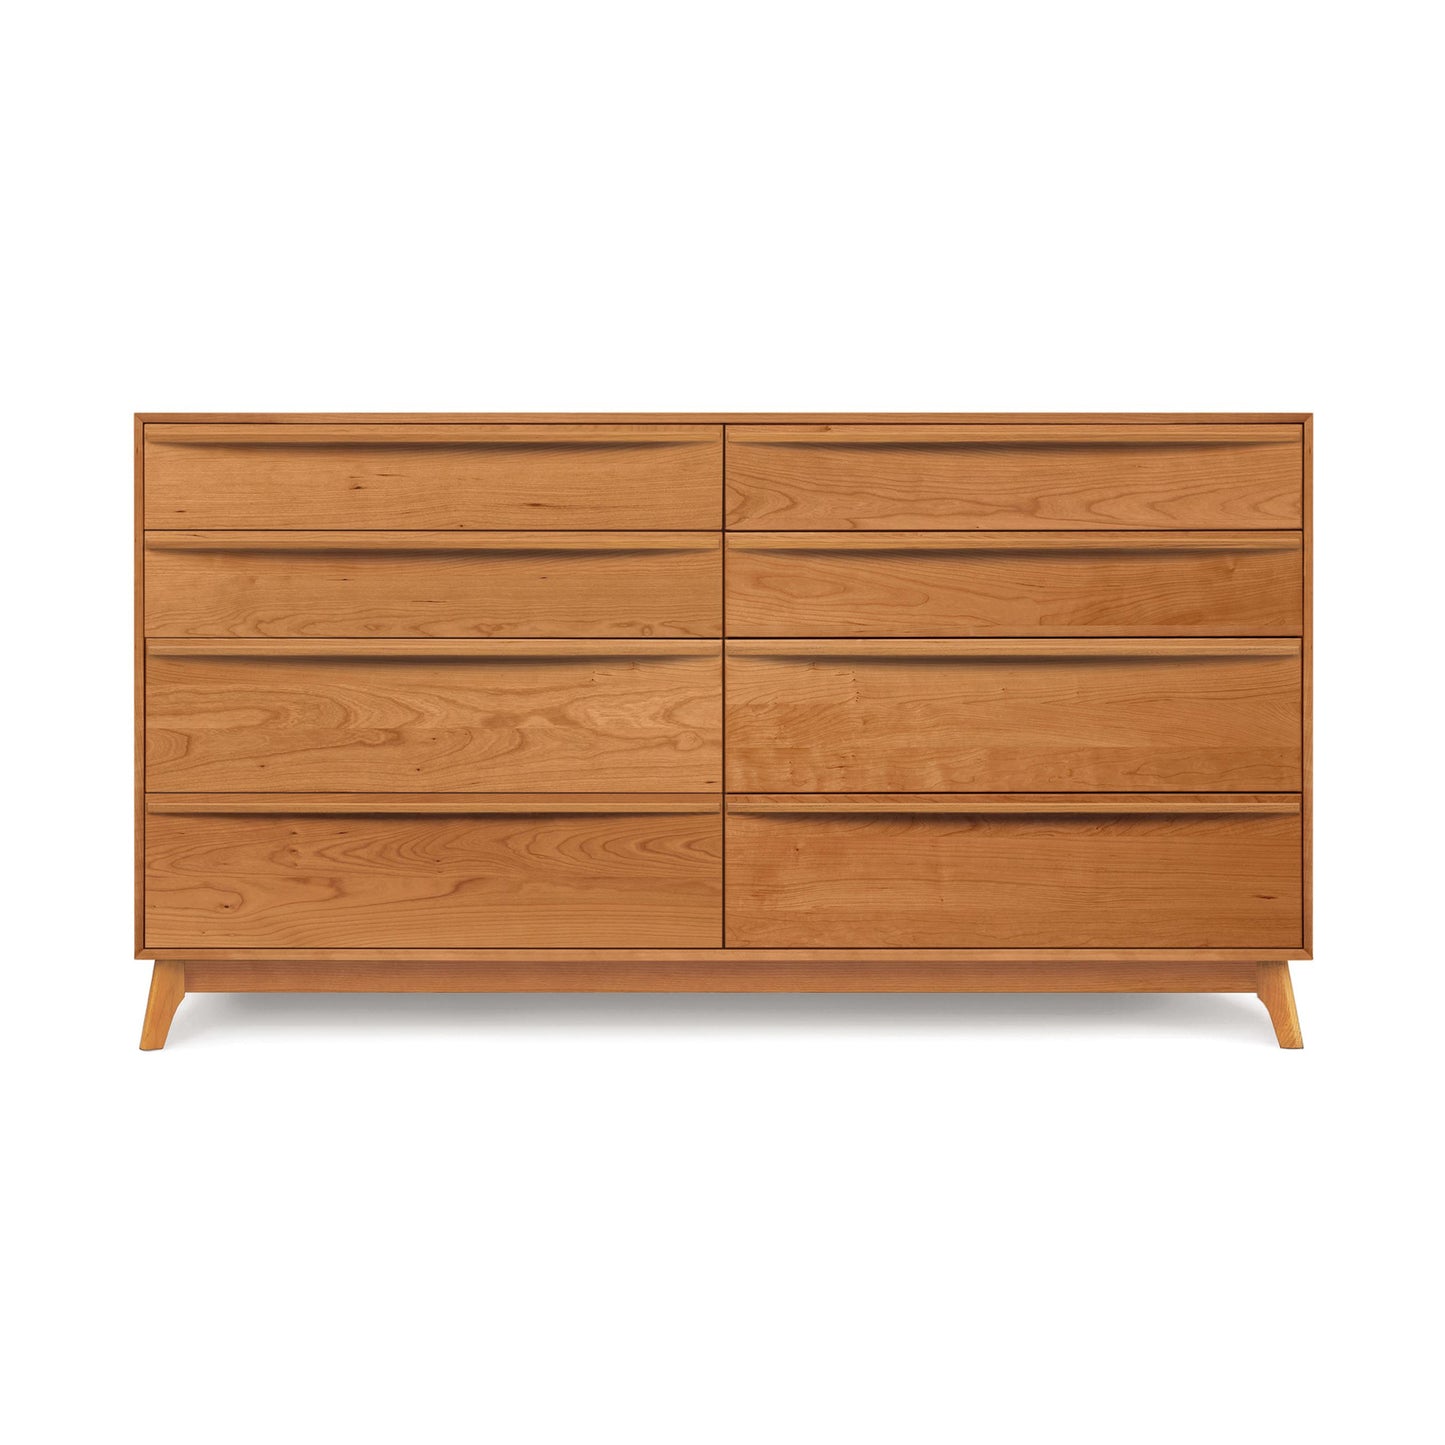 A modern wooden dresser from the Copeland Furniture Catalina 8-Drawer Dresser collection with eight drawers, isolated against a white background.